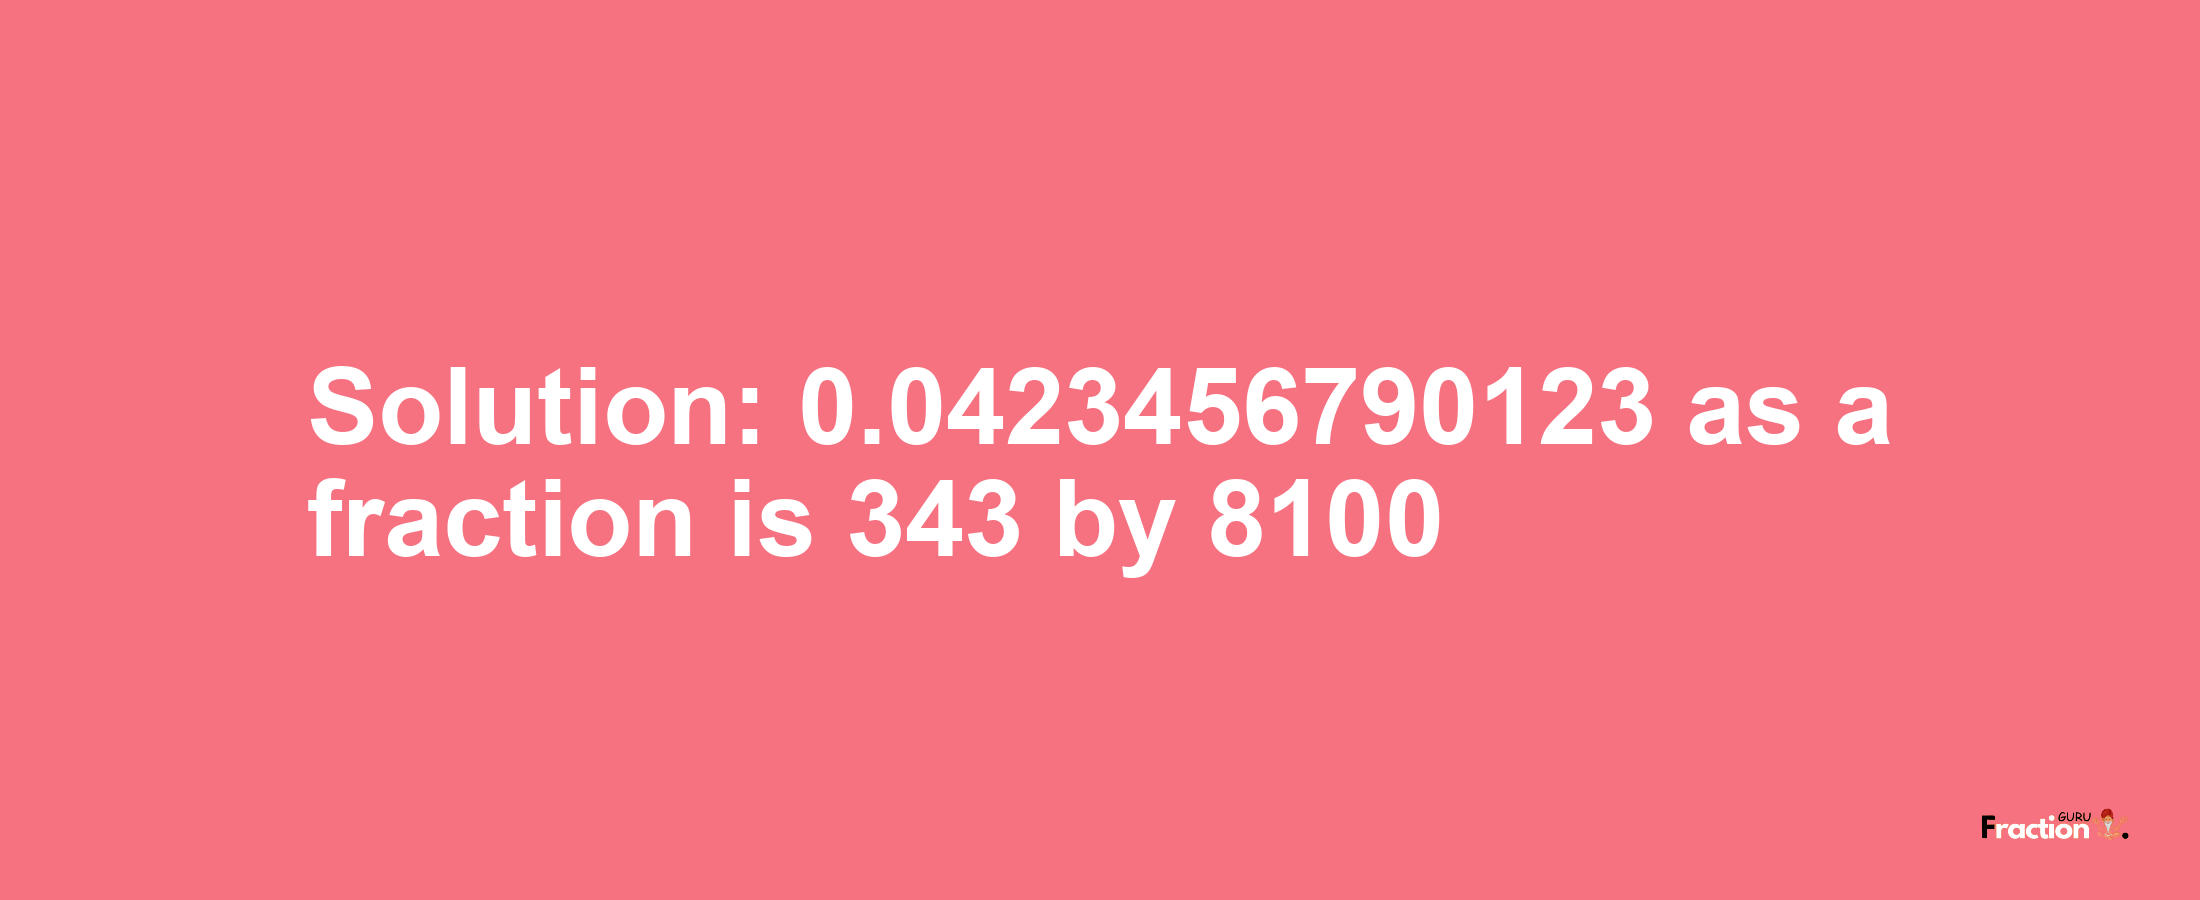 Solution:0.0423456790123 as a fraction is 343/8100